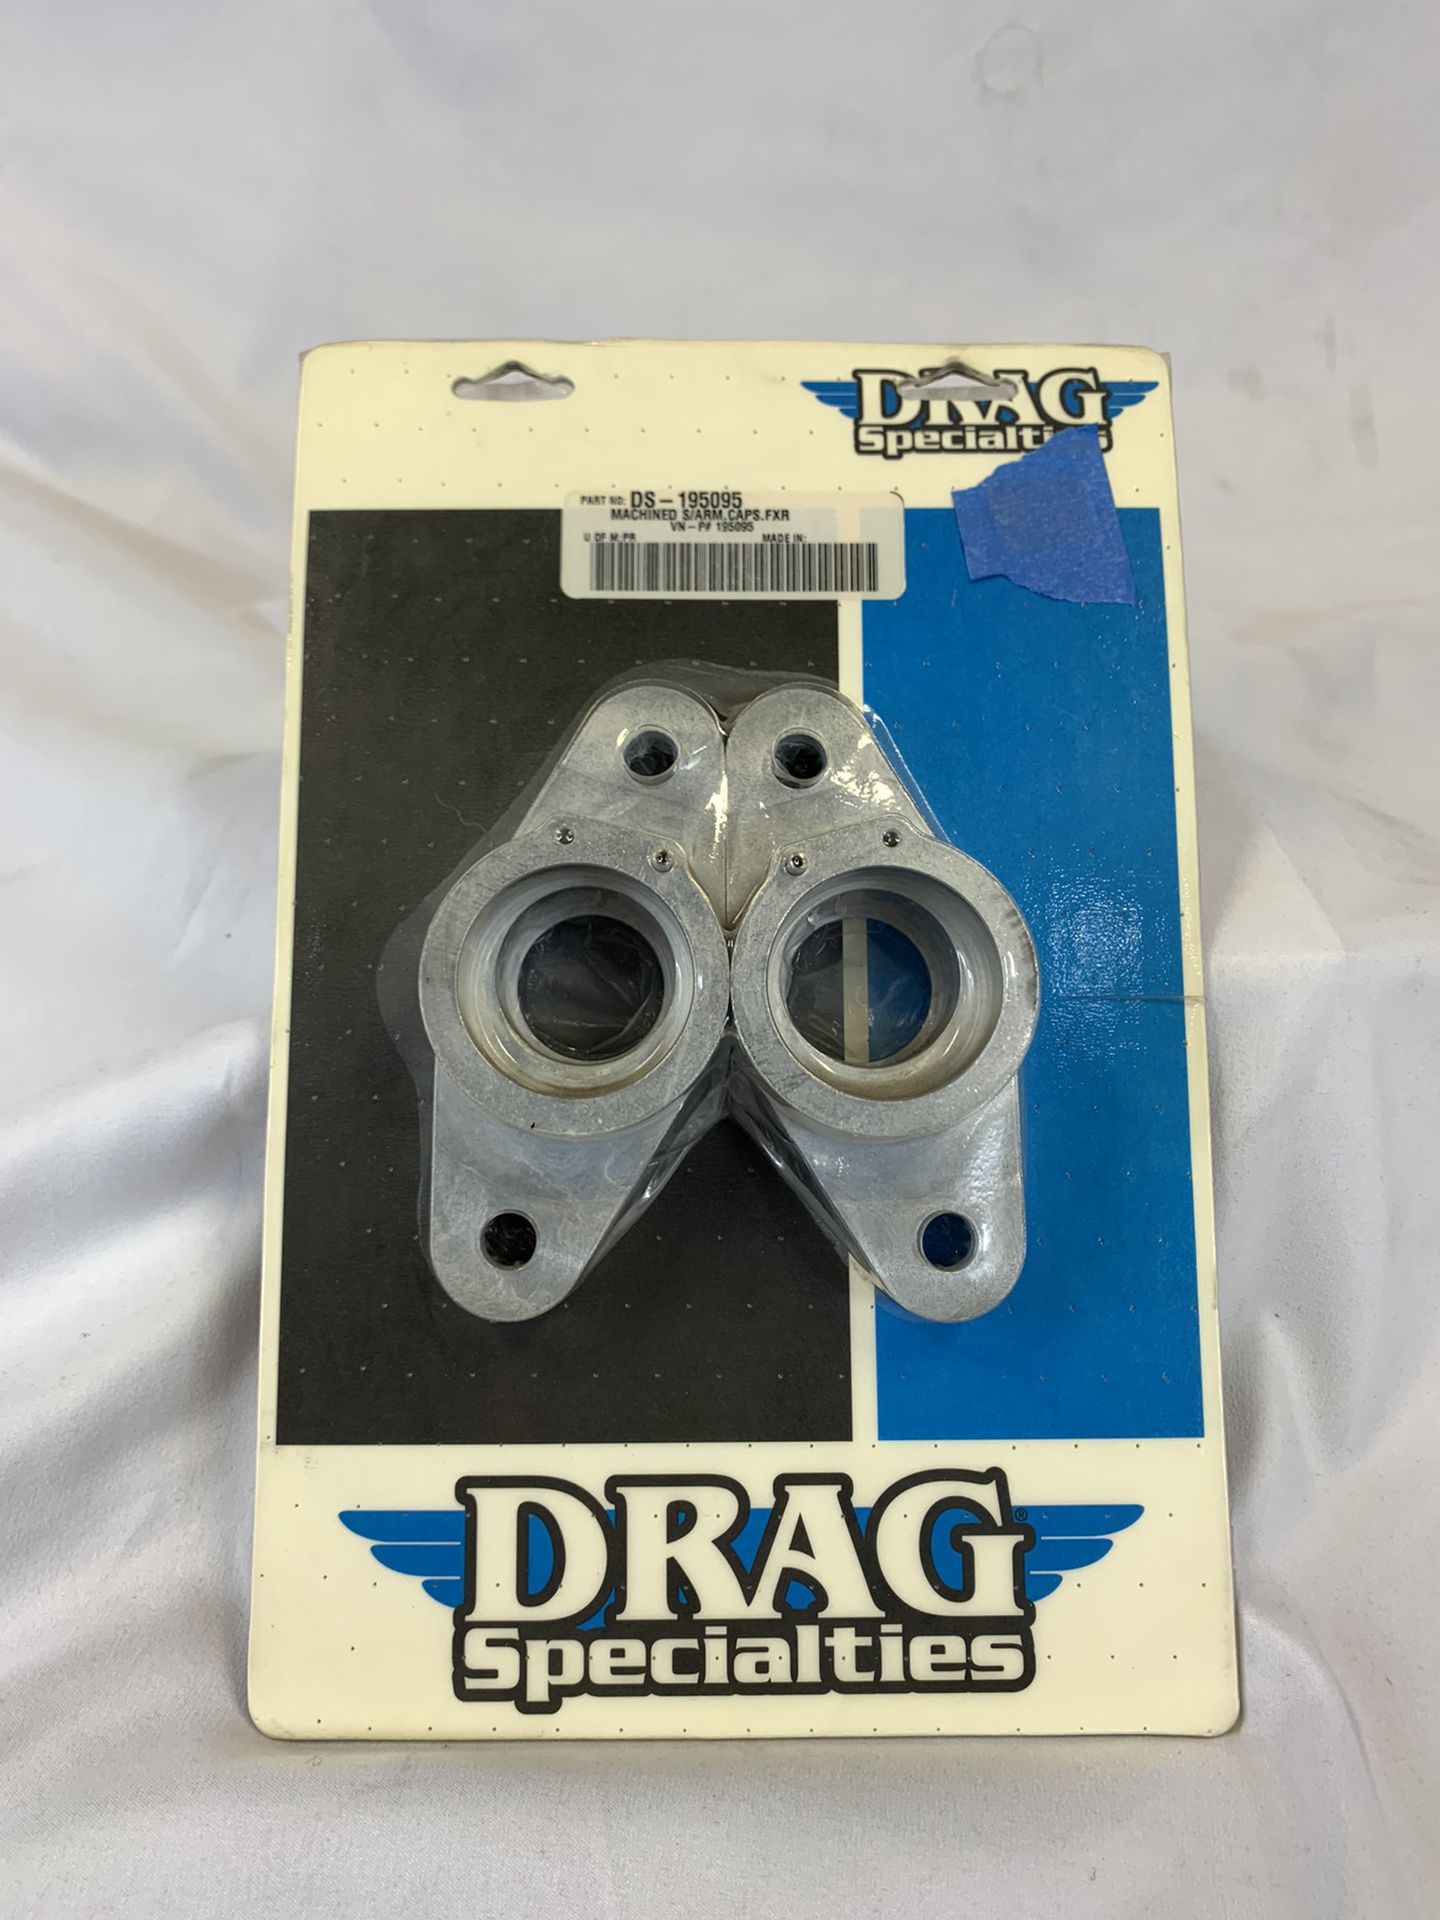 Drag Specialties machined Swing Arm Caps For Harley Davidson FXR models 